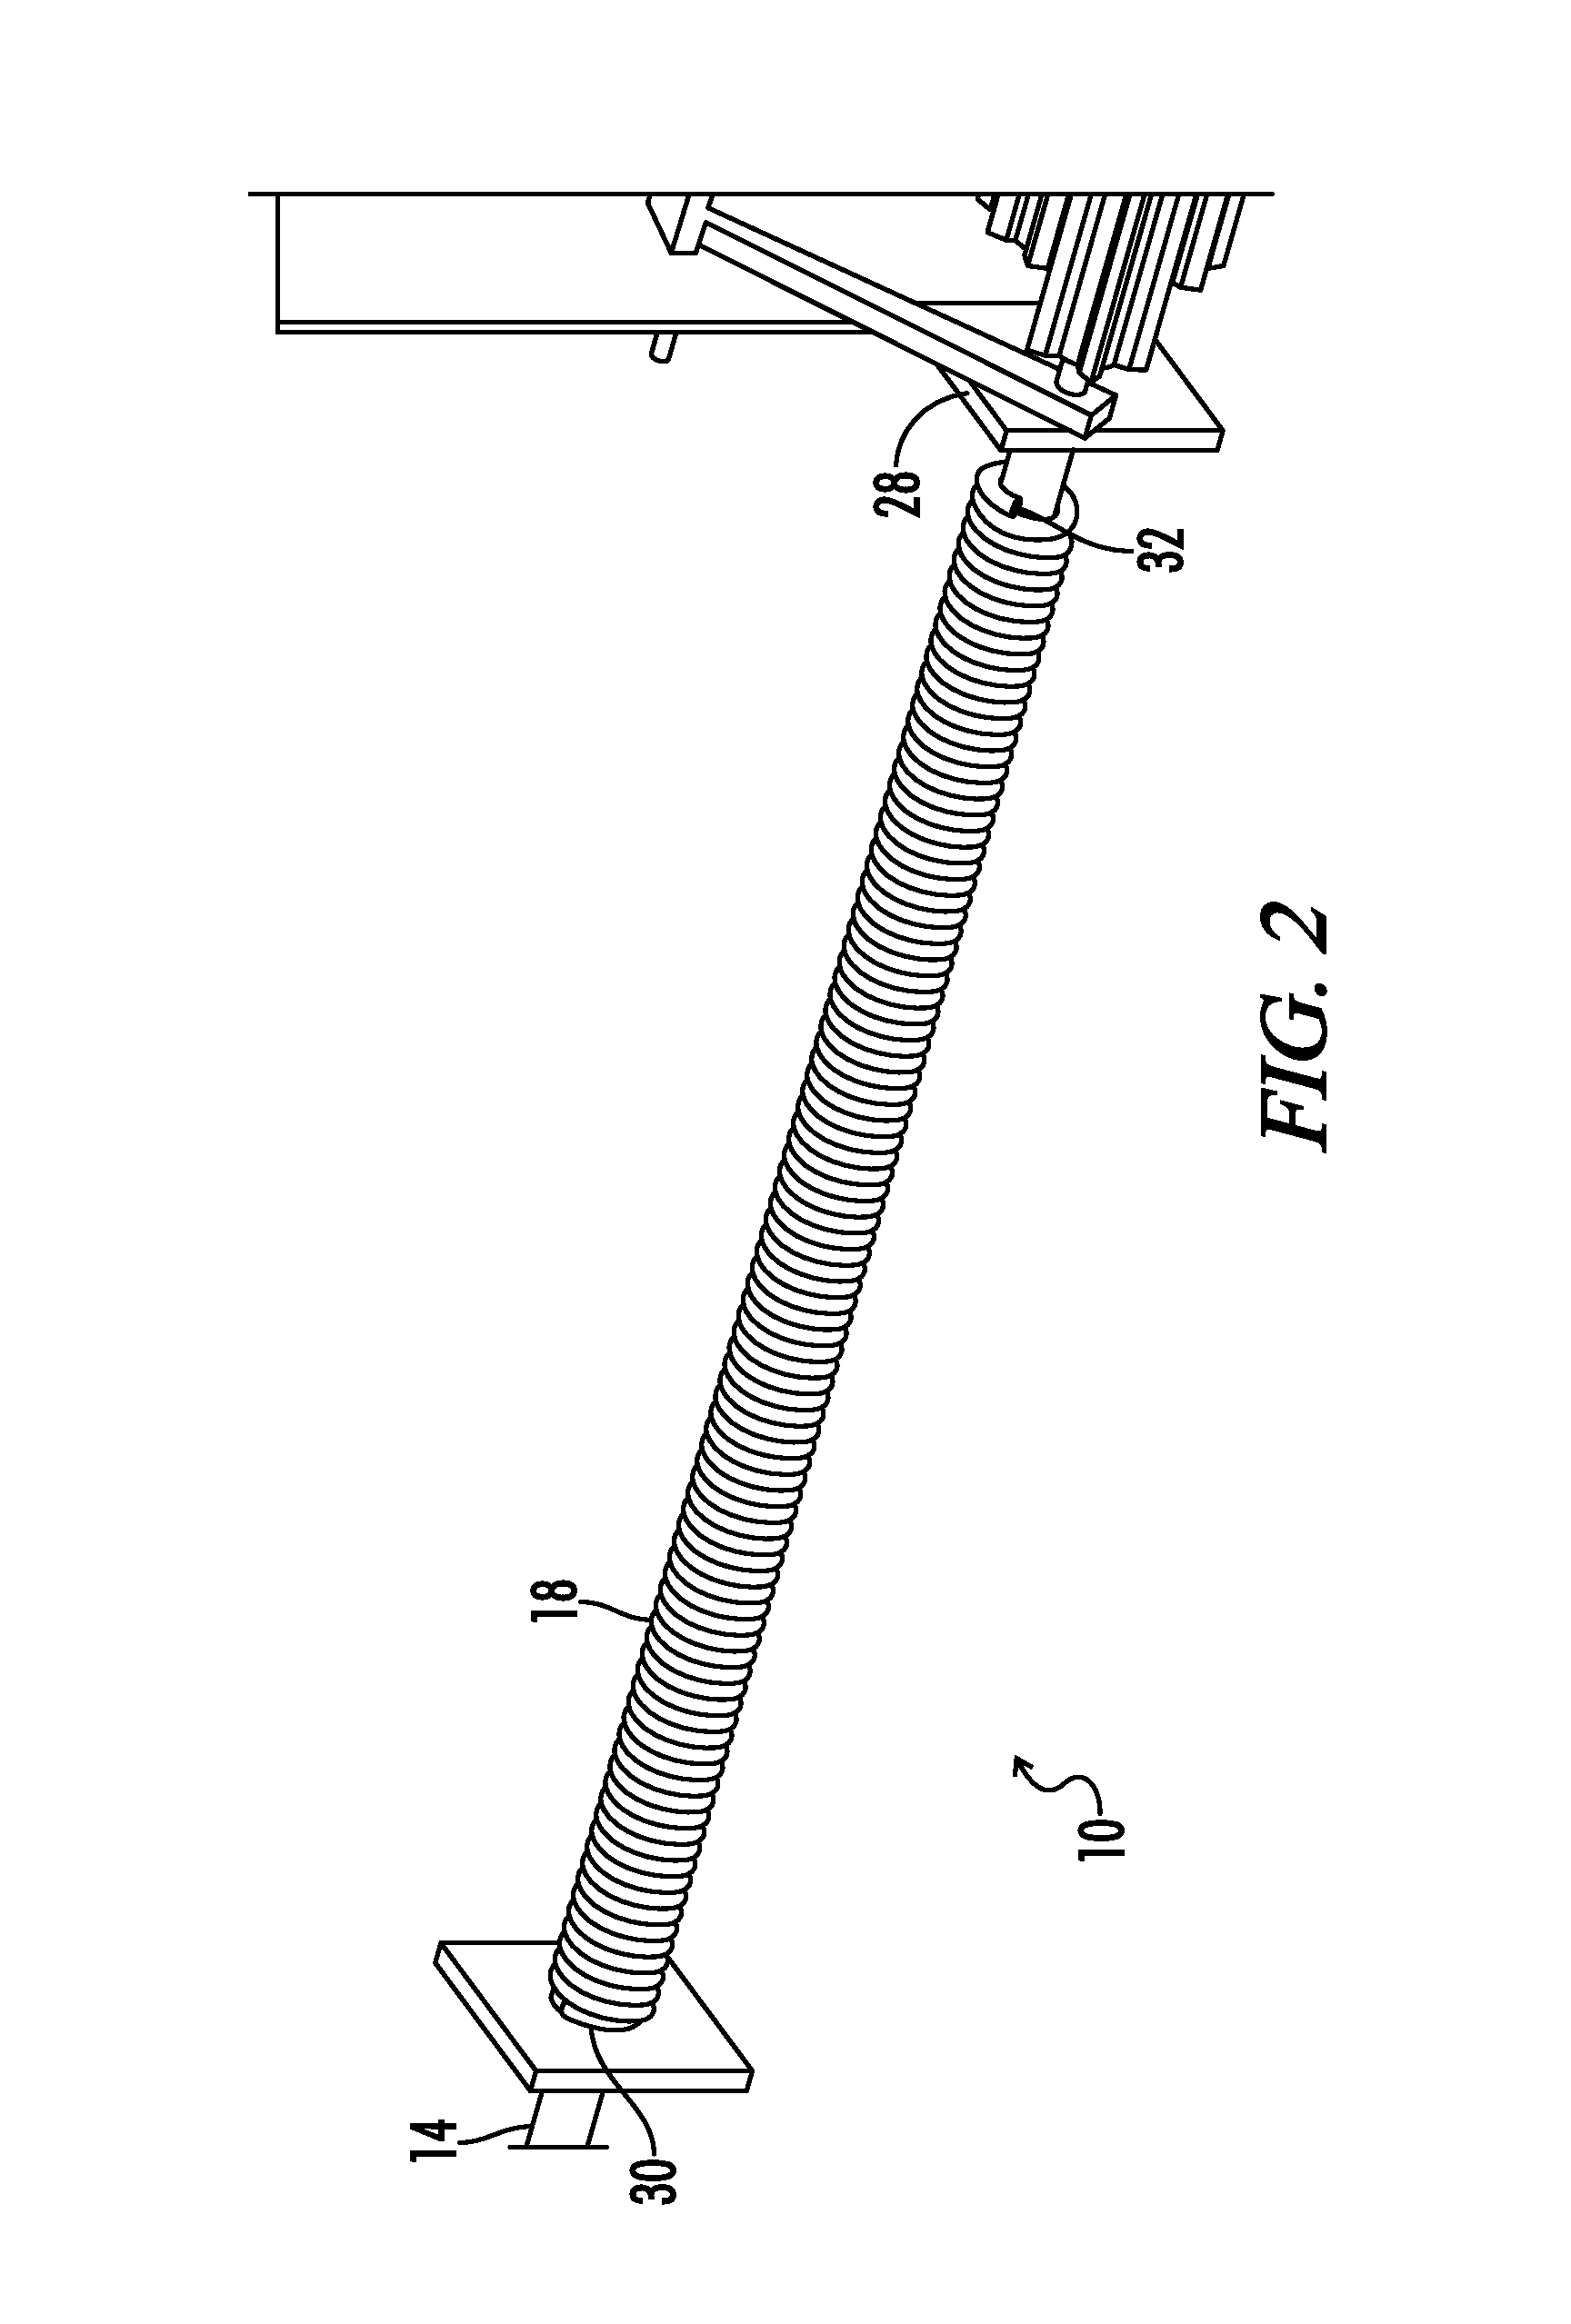 Static Weight Energy Production Apparatus